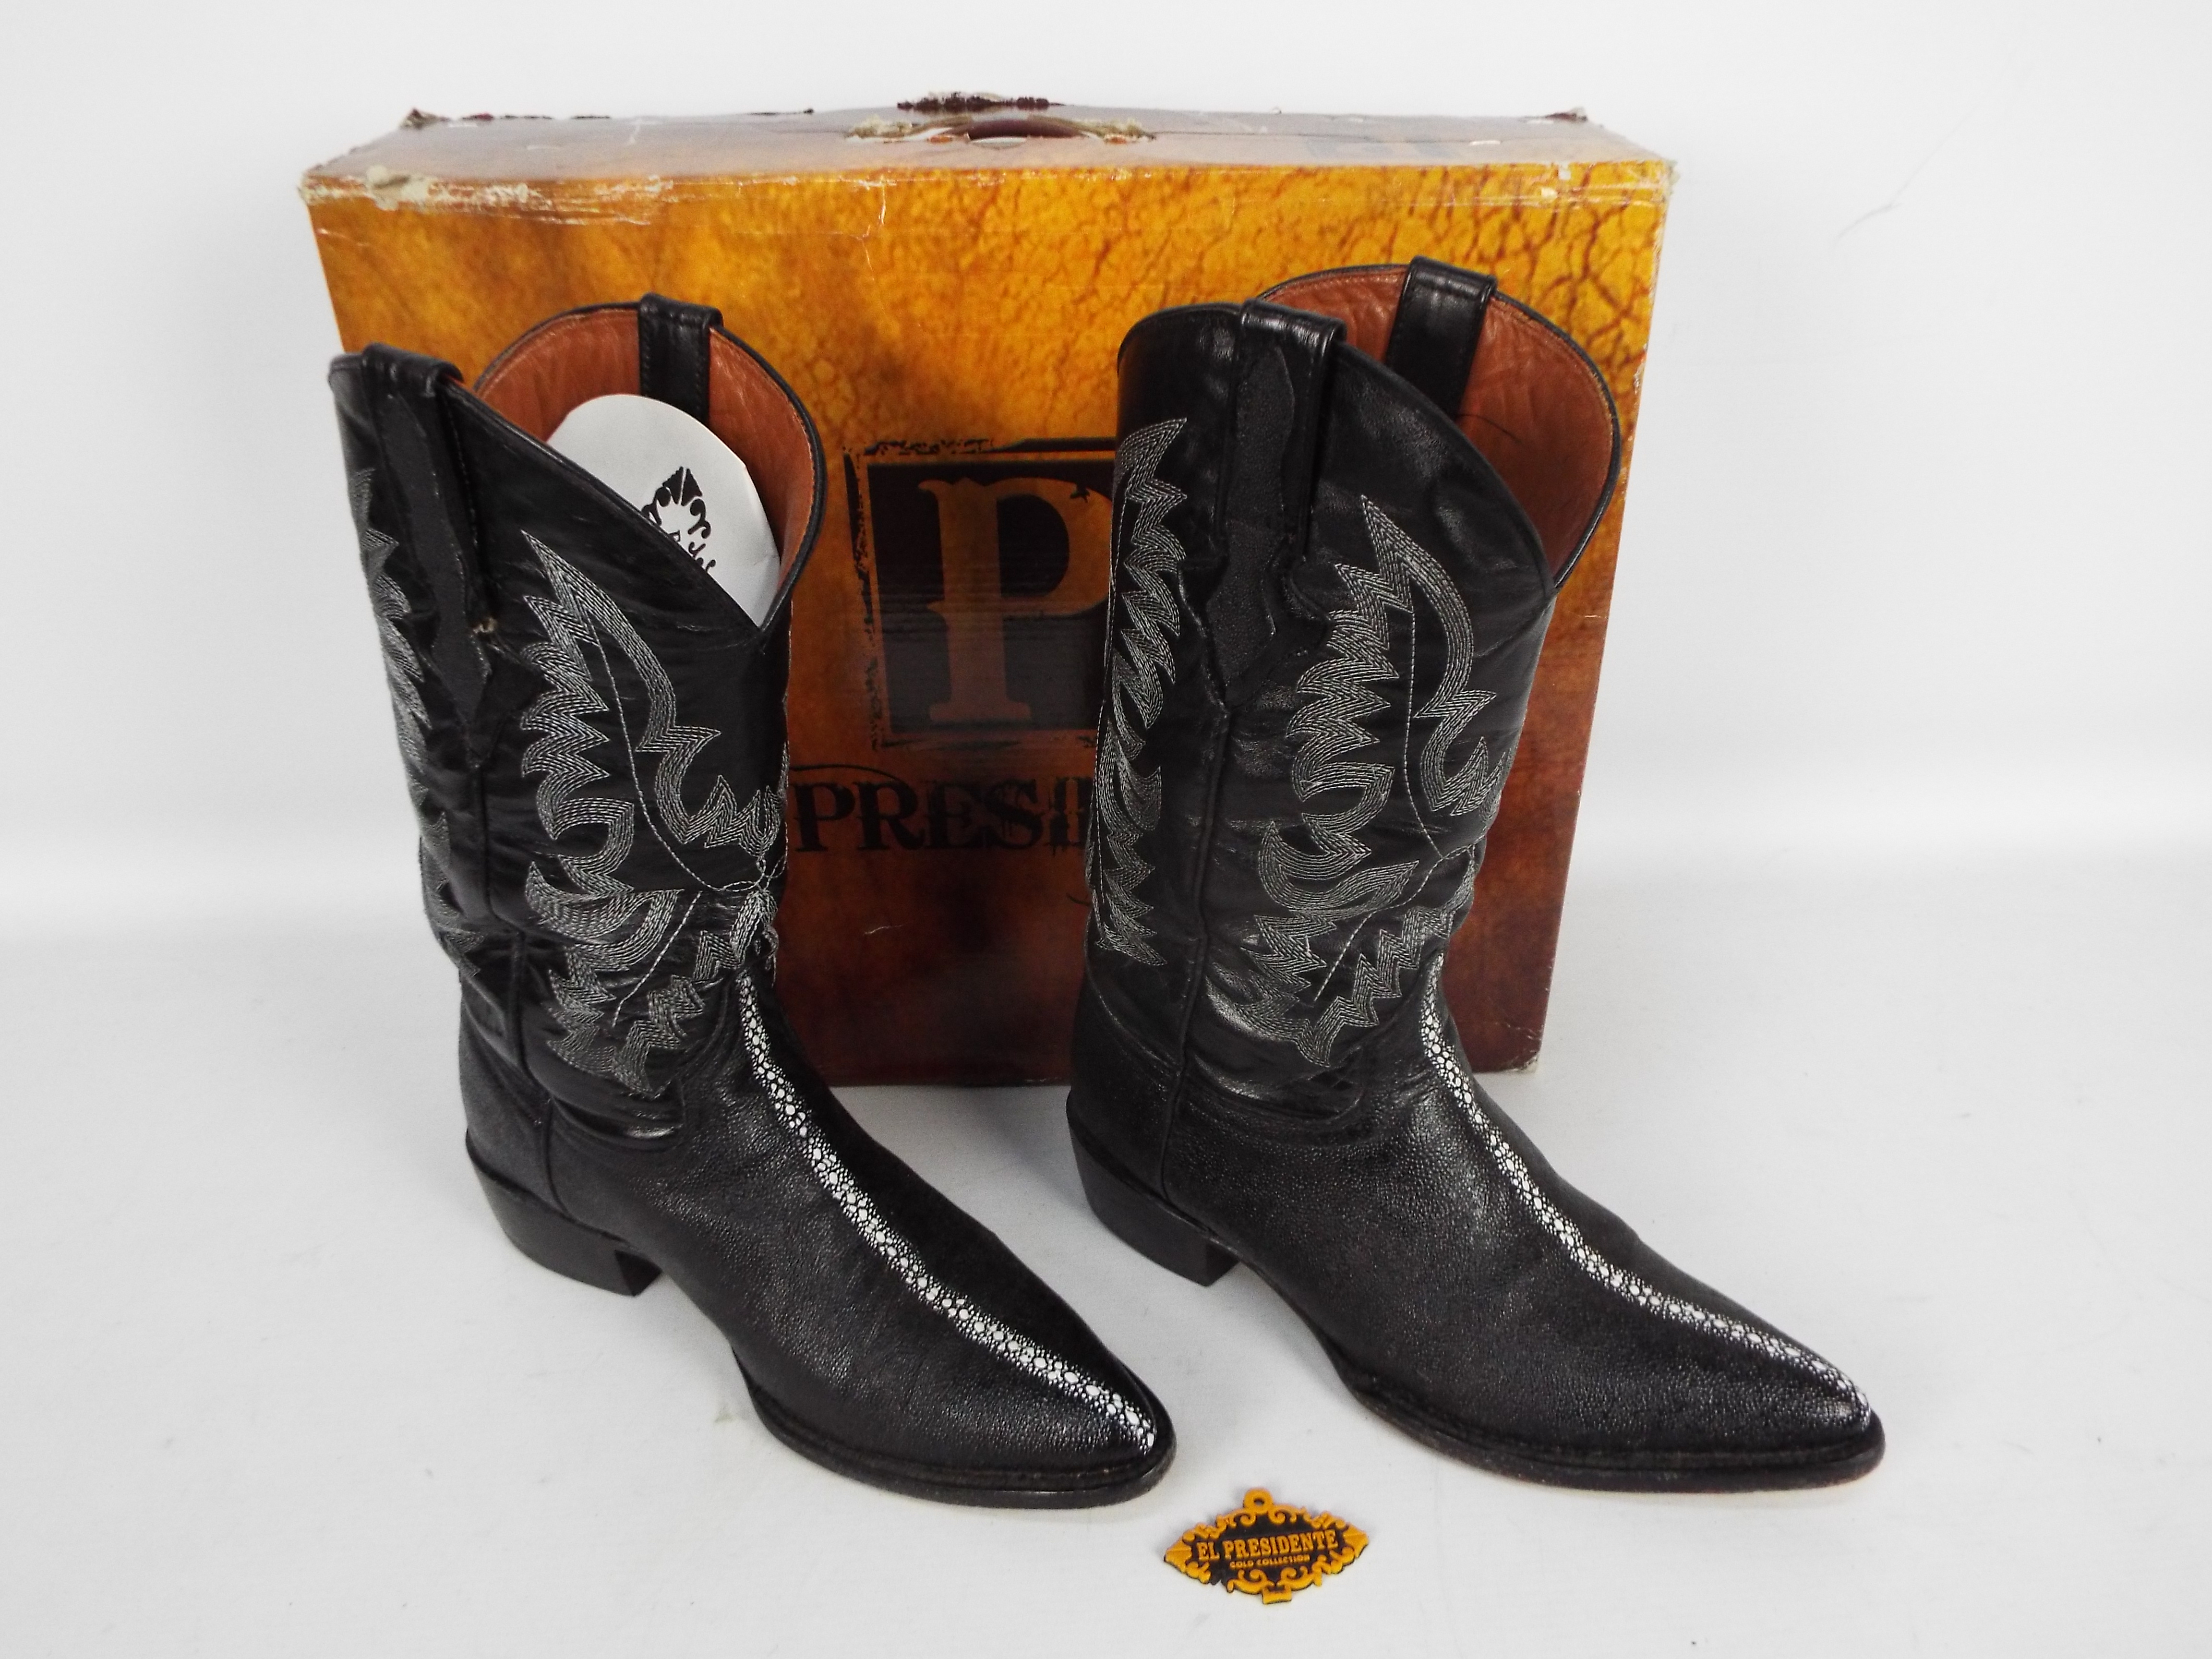 El Presidente Gold Collection - a pair of black boots, UK size 7, EUA size 8, Mexico size 27,